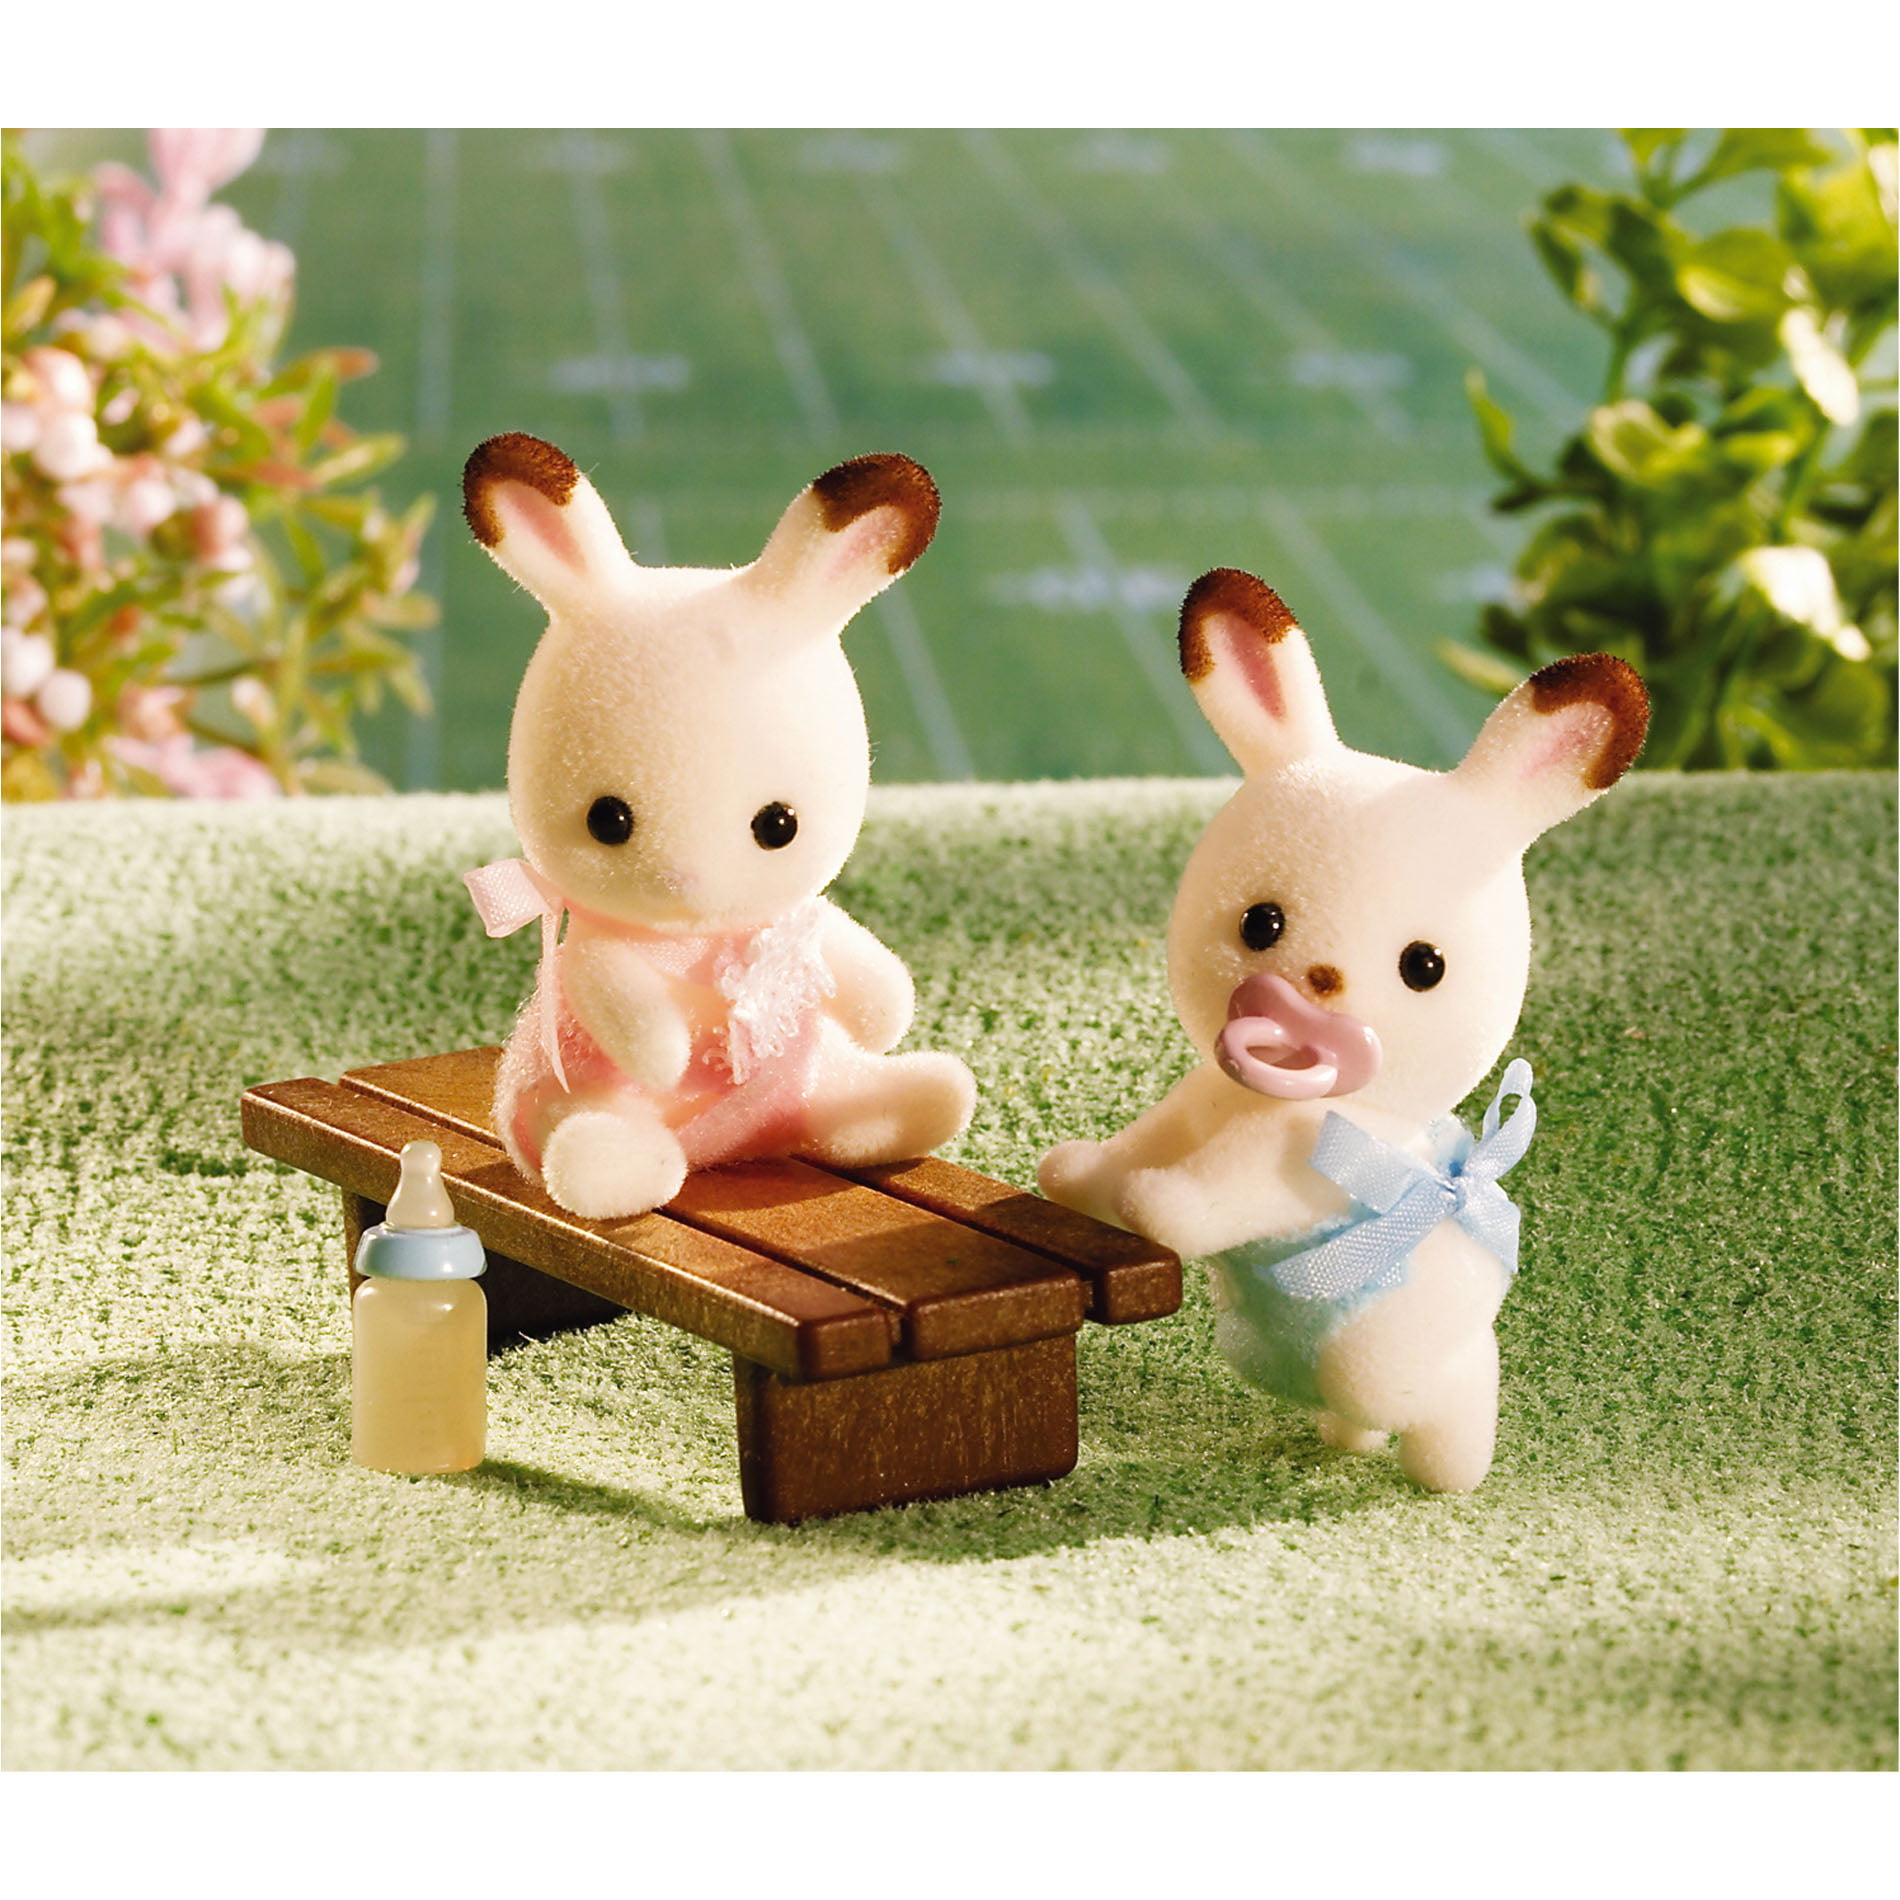 Calico Critters Apple N Jake's Ride N Play, Dollhouse Playset with 